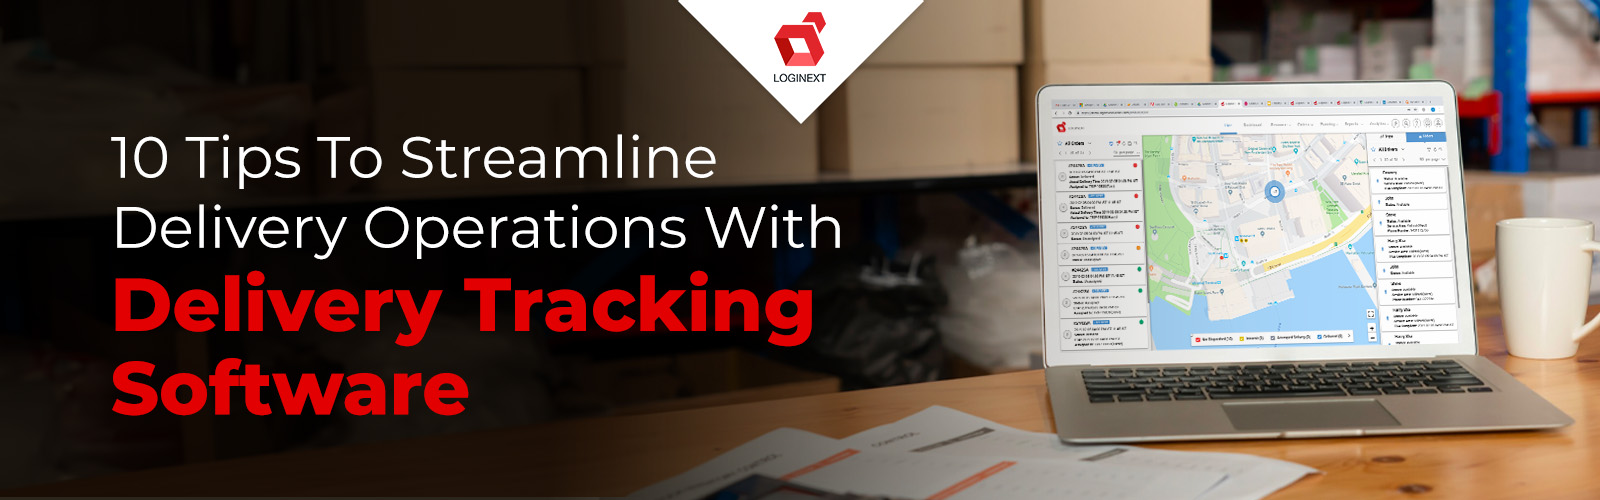 10 Tips To Streamline Delivery Operations With Delivery Tracking Software